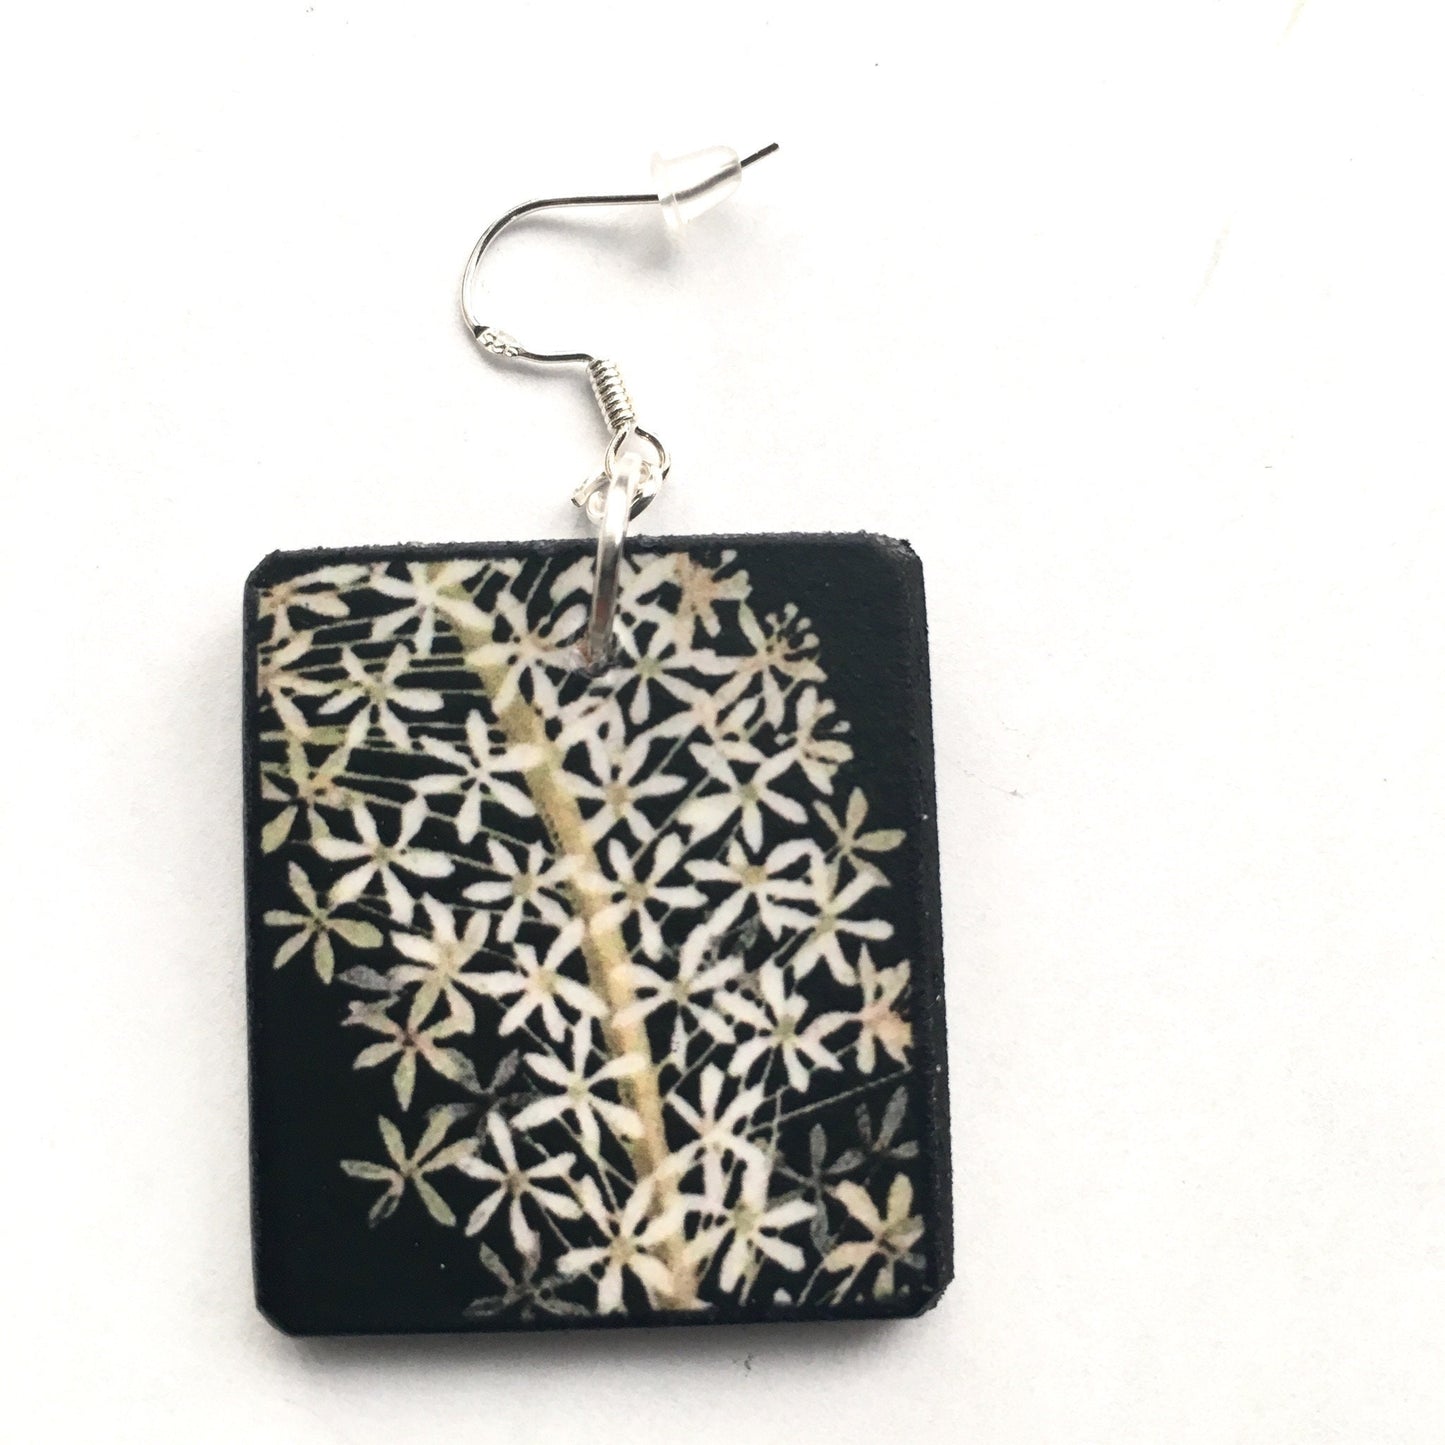 Obljewellery sustainable art earrings. These aesthetic earrings are on wood in black and white flowers  a botanical artwork by Mary Delany. The earings are an artsy gift for her.